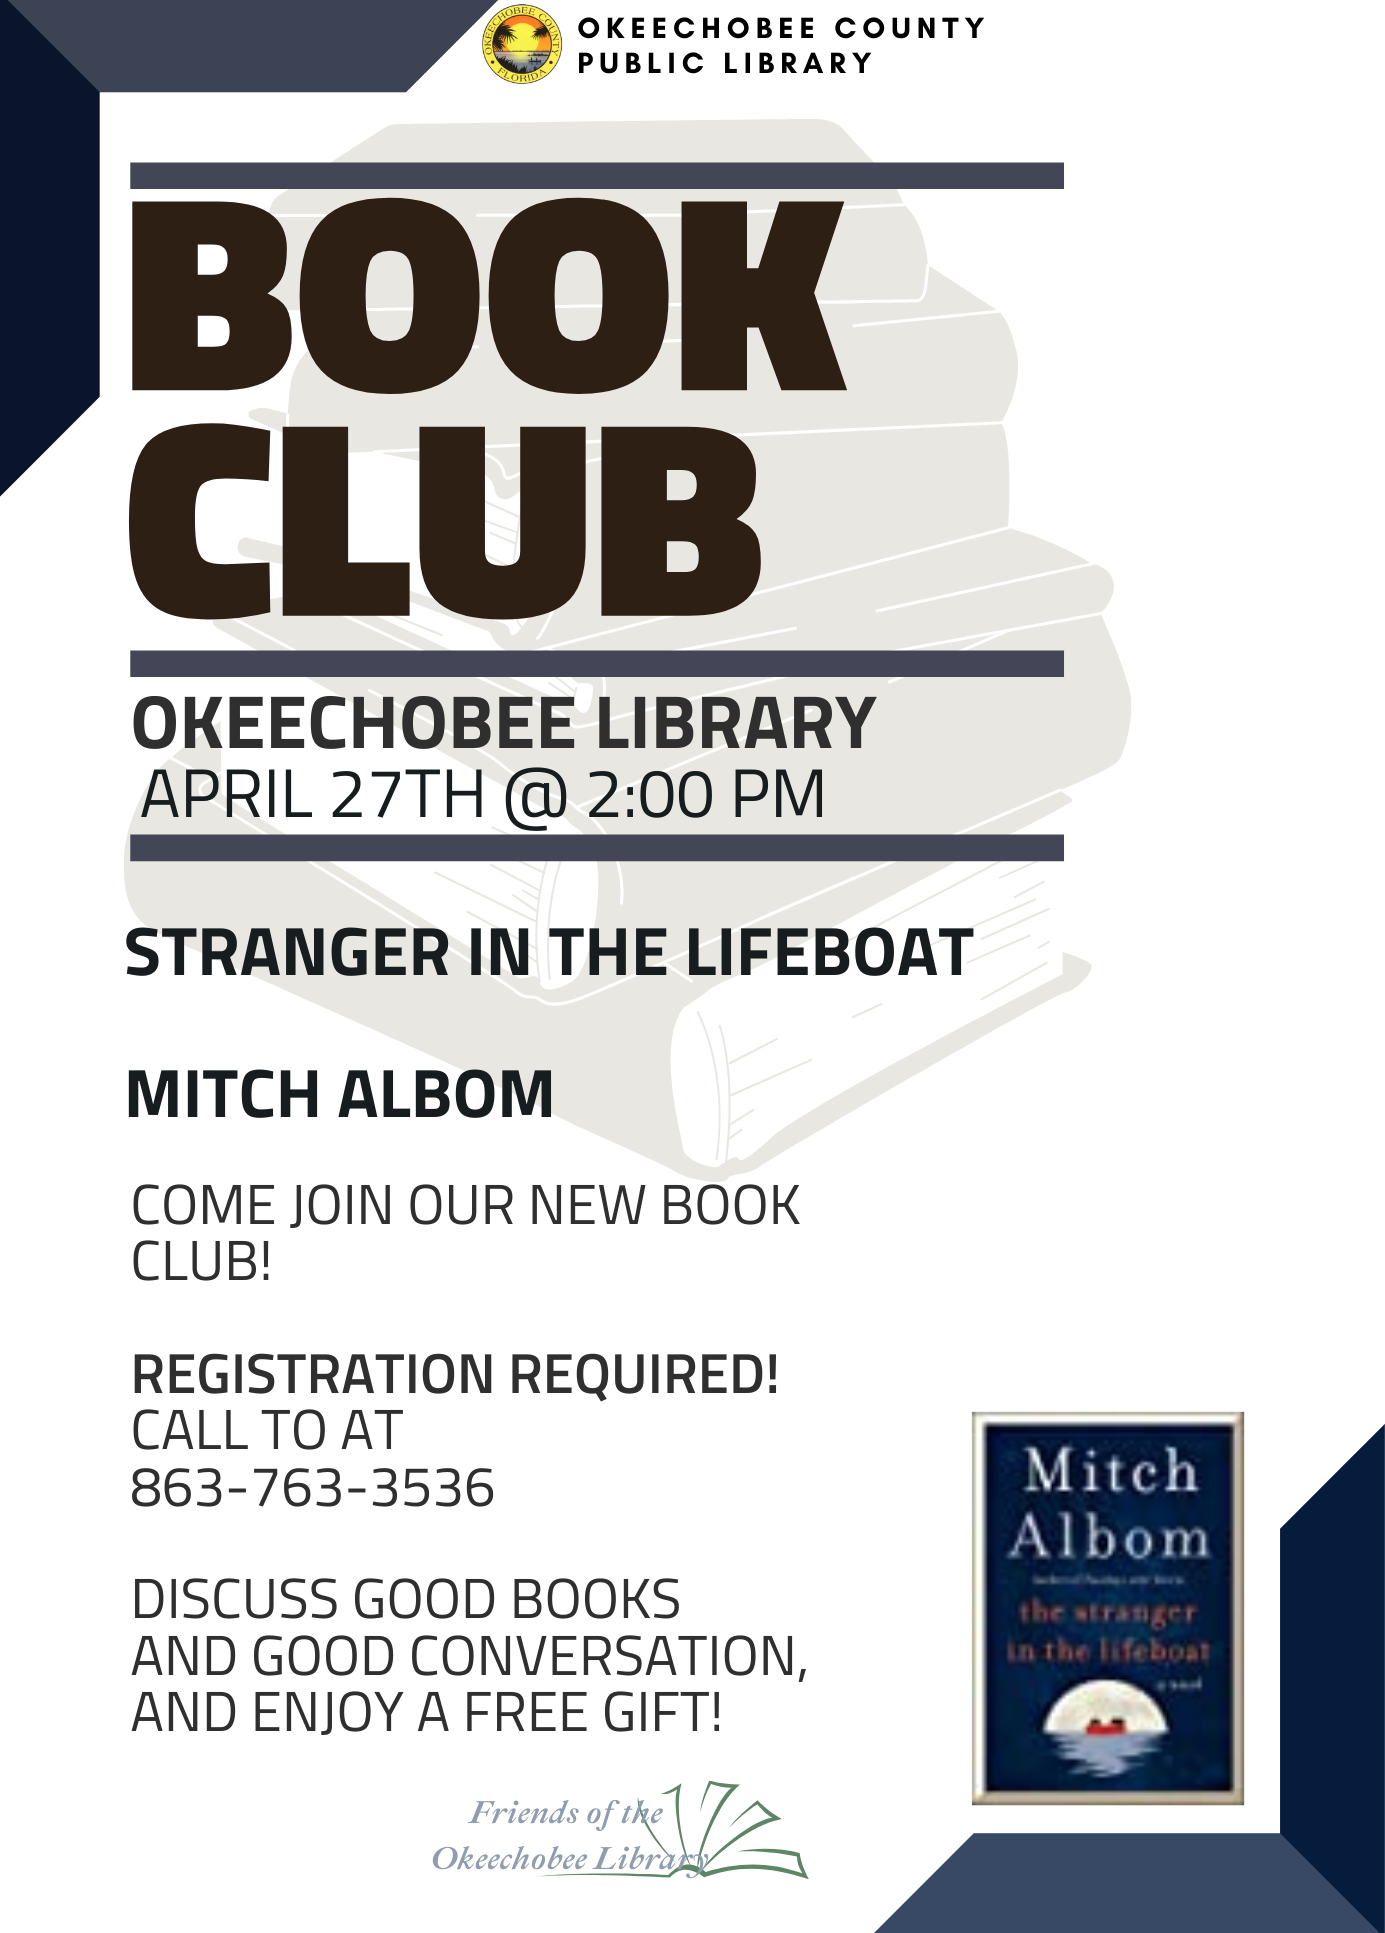 This month we will be discussing 'Stranger in the Lifeboat' by Mitch Albom. Also every month we have a small FREE gift bag for attendees!